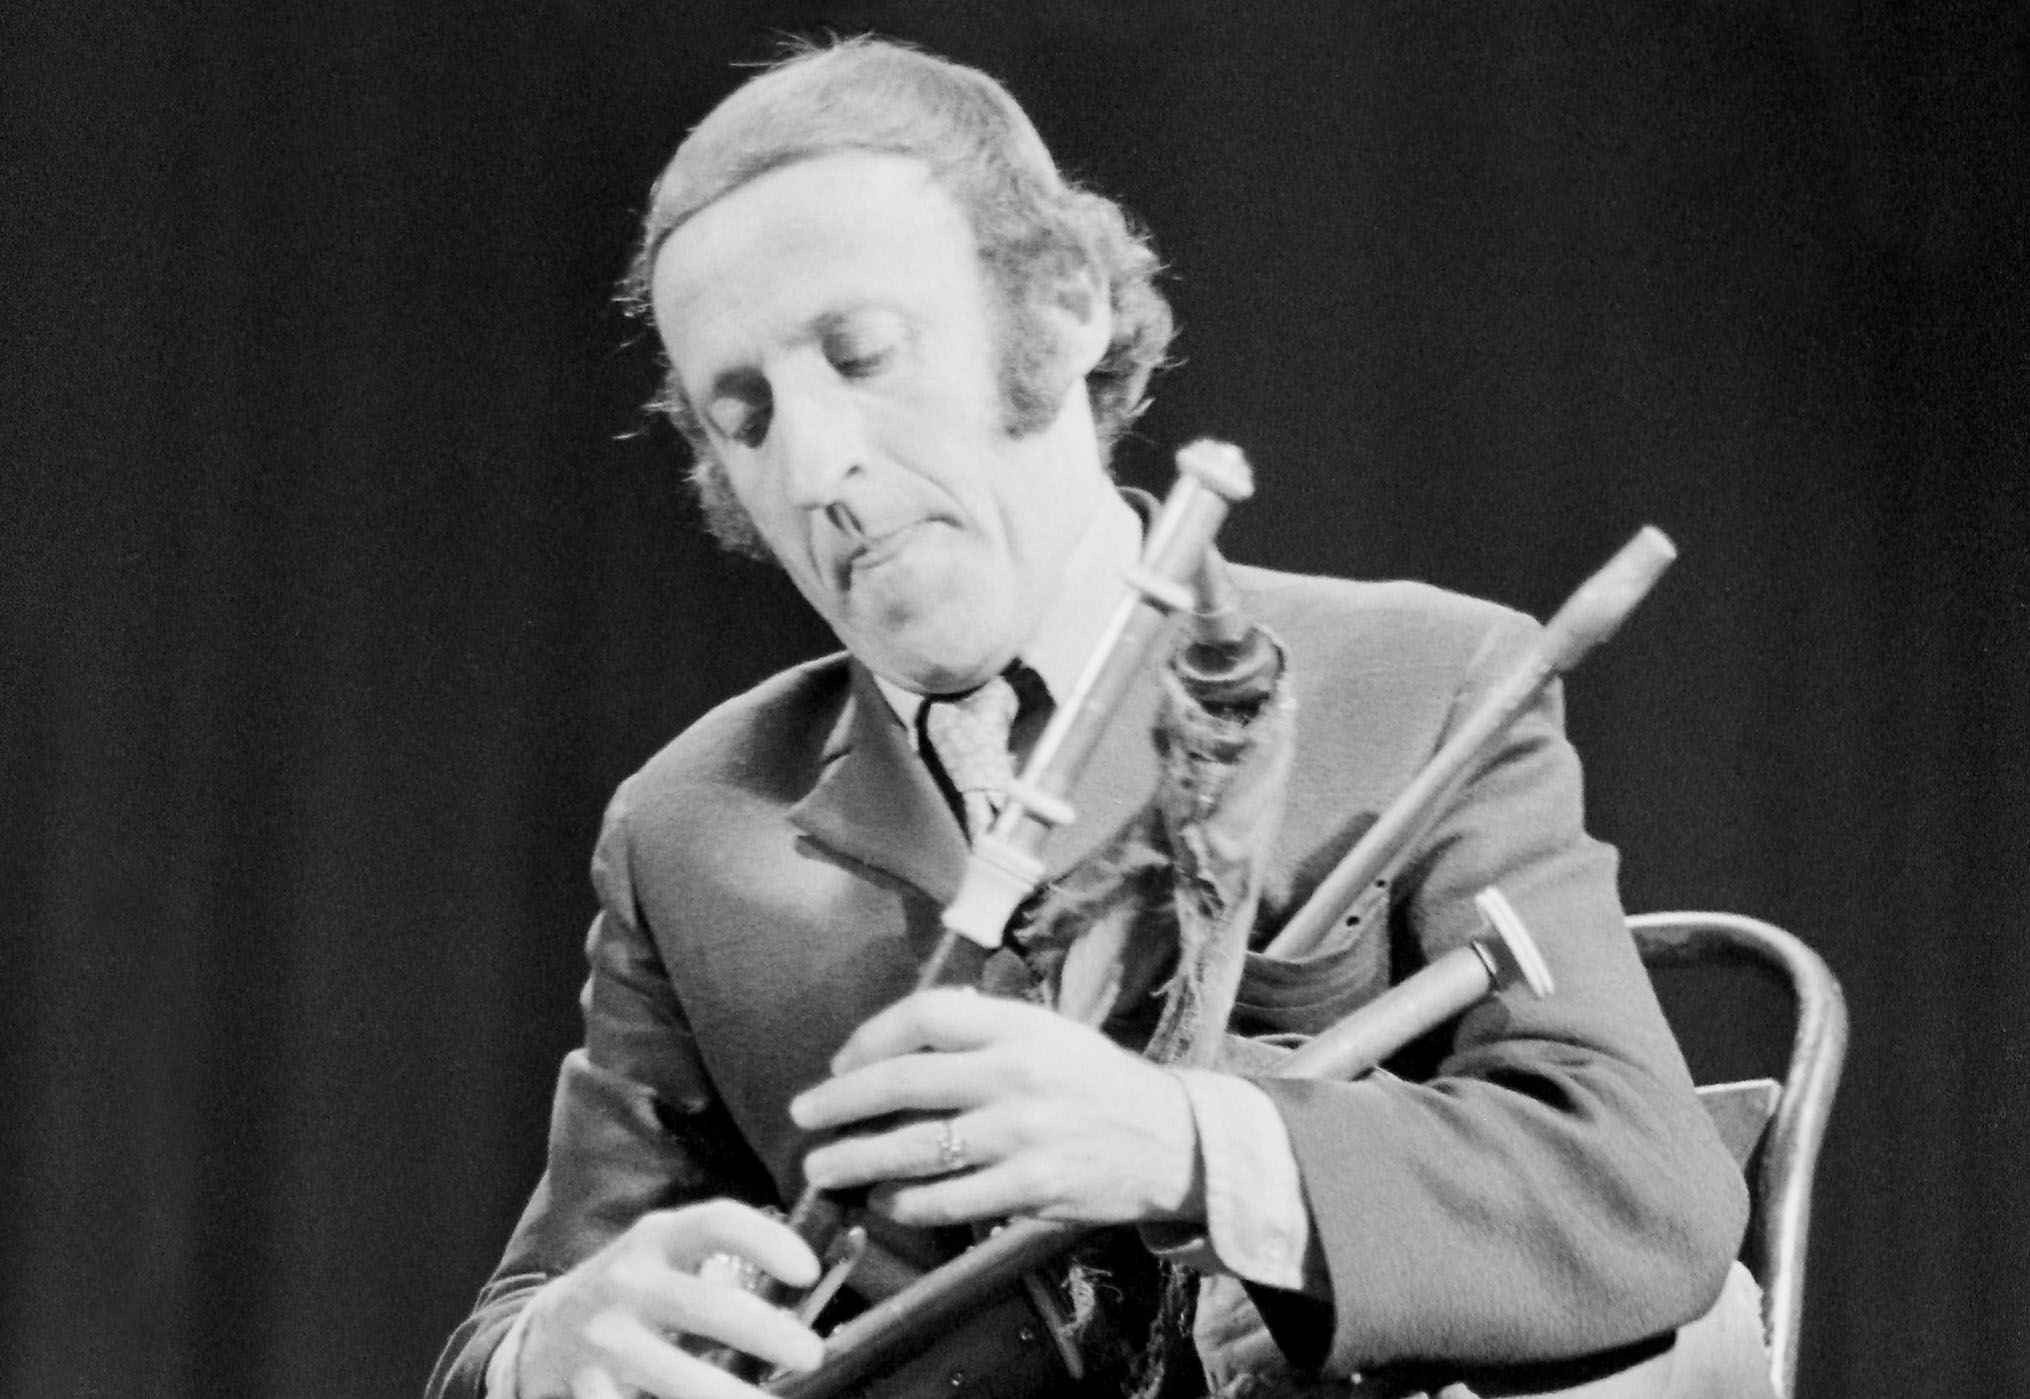 Paddy Moloney, a master of the uileann pipes